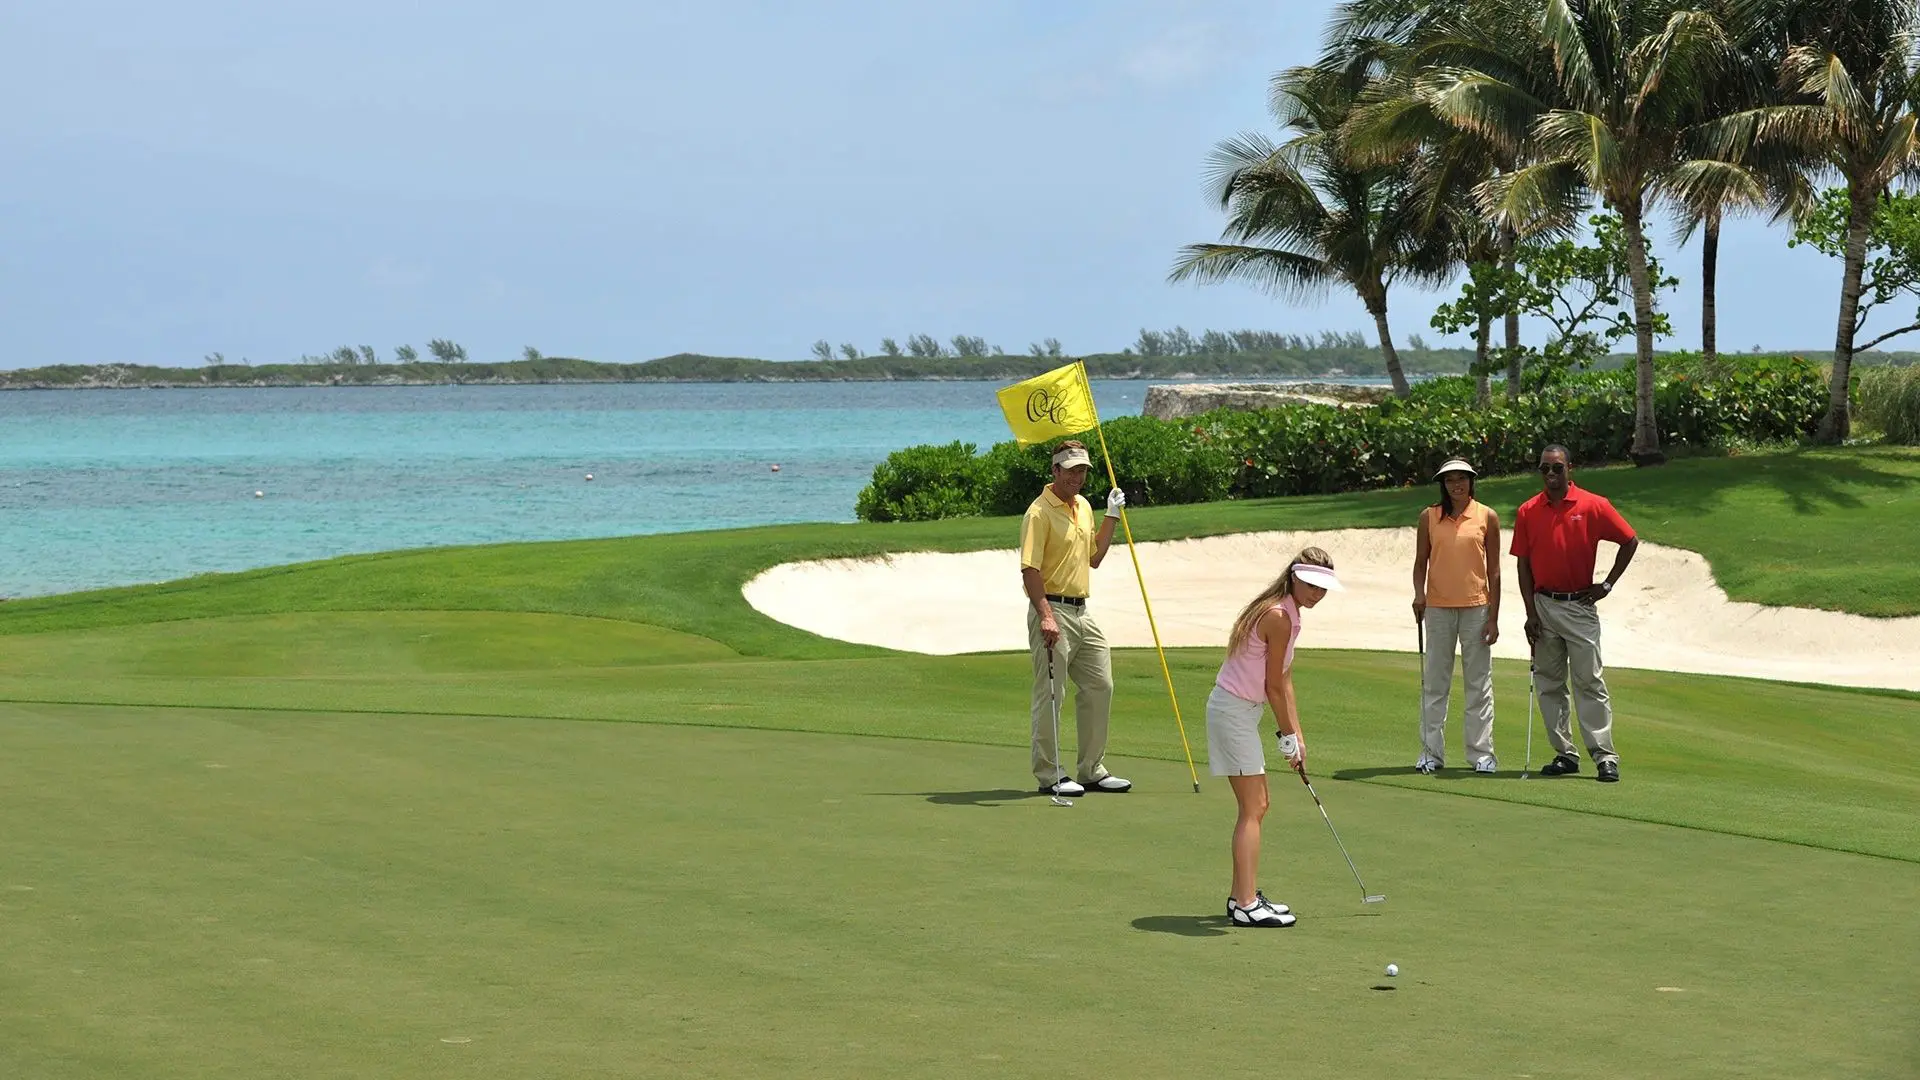 Three people are playing golf on a green.